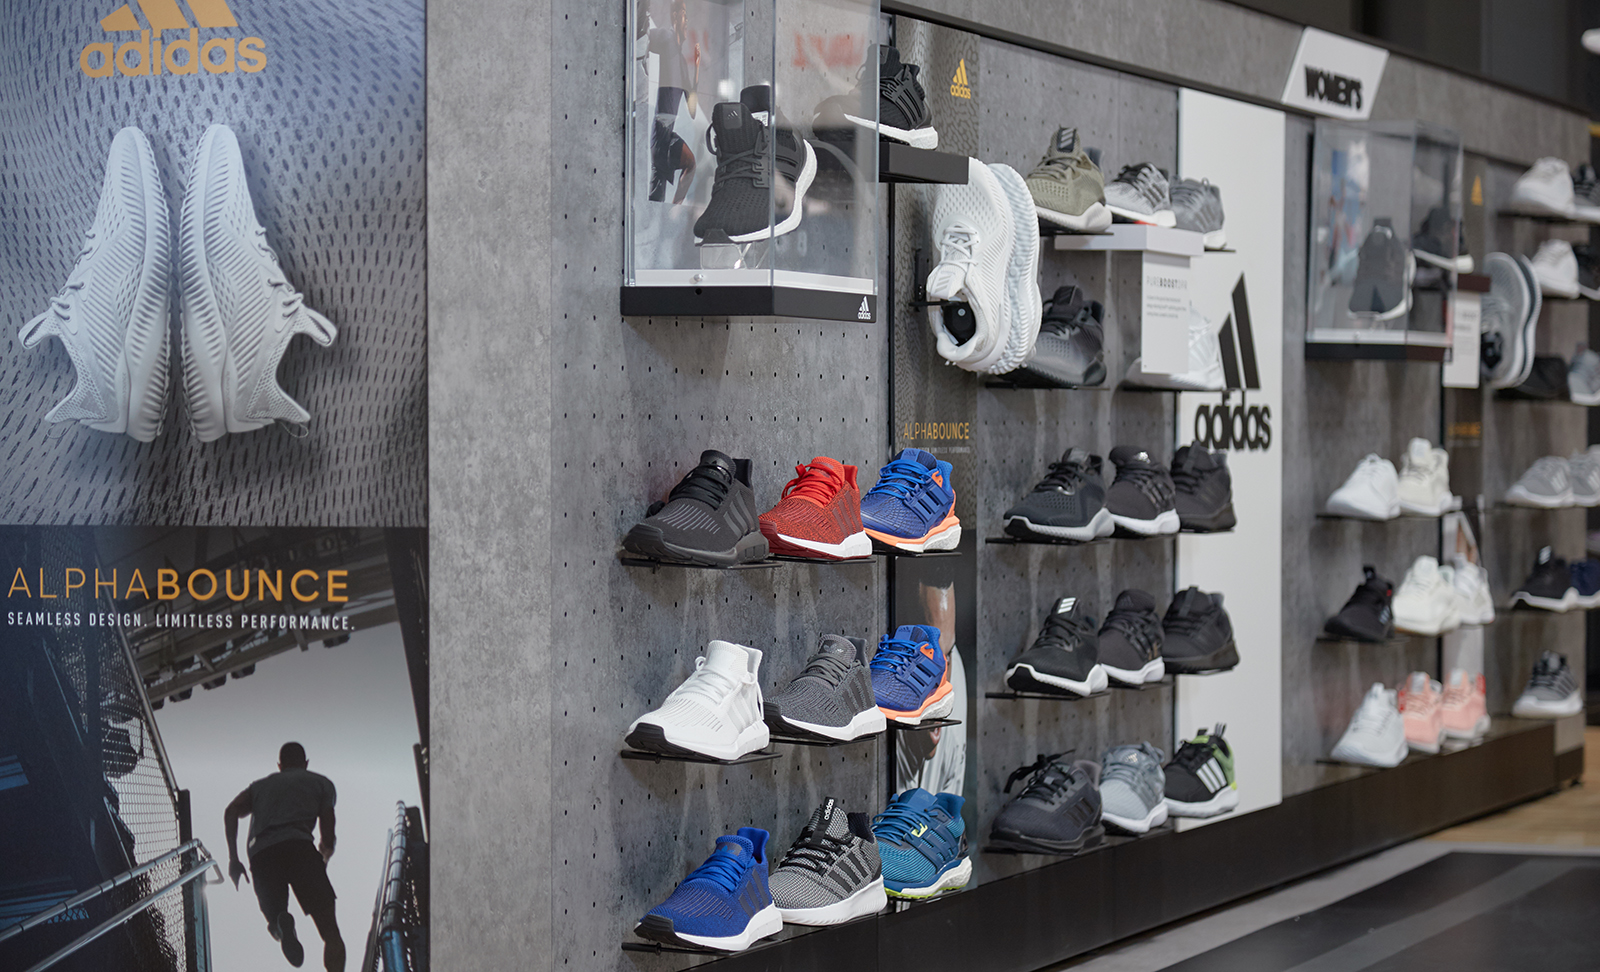 A closer look at the custom built shoe wall display designed and manufactured by The Bernard Group.